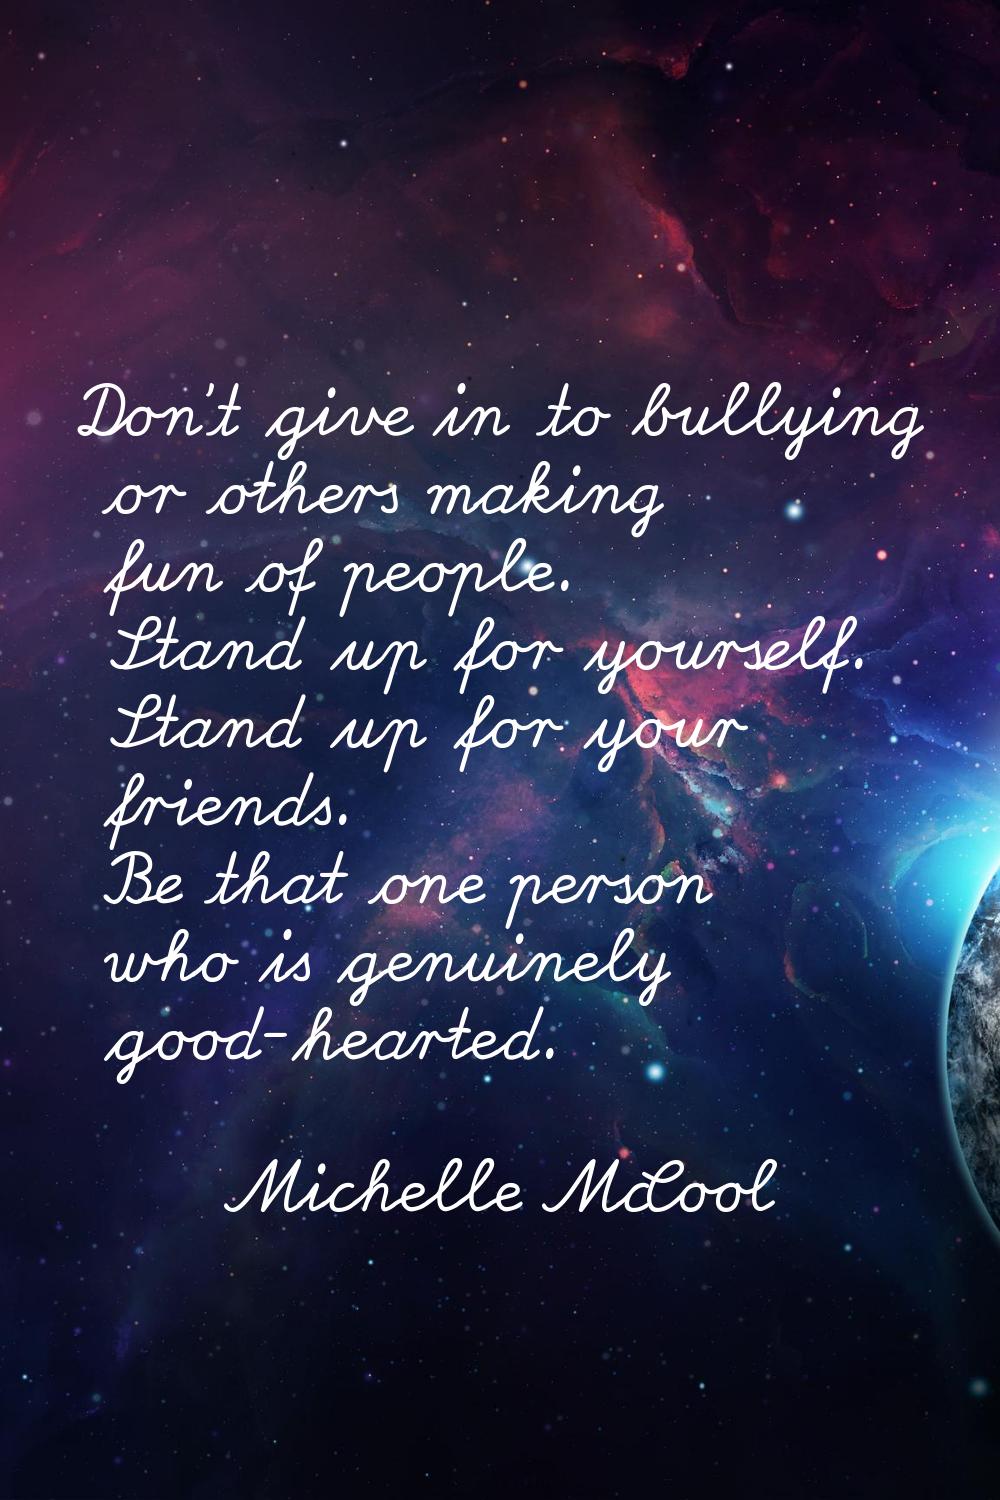 Don't give in to bullying or others making fun of people. Stand up for yourself. Stand up for your 